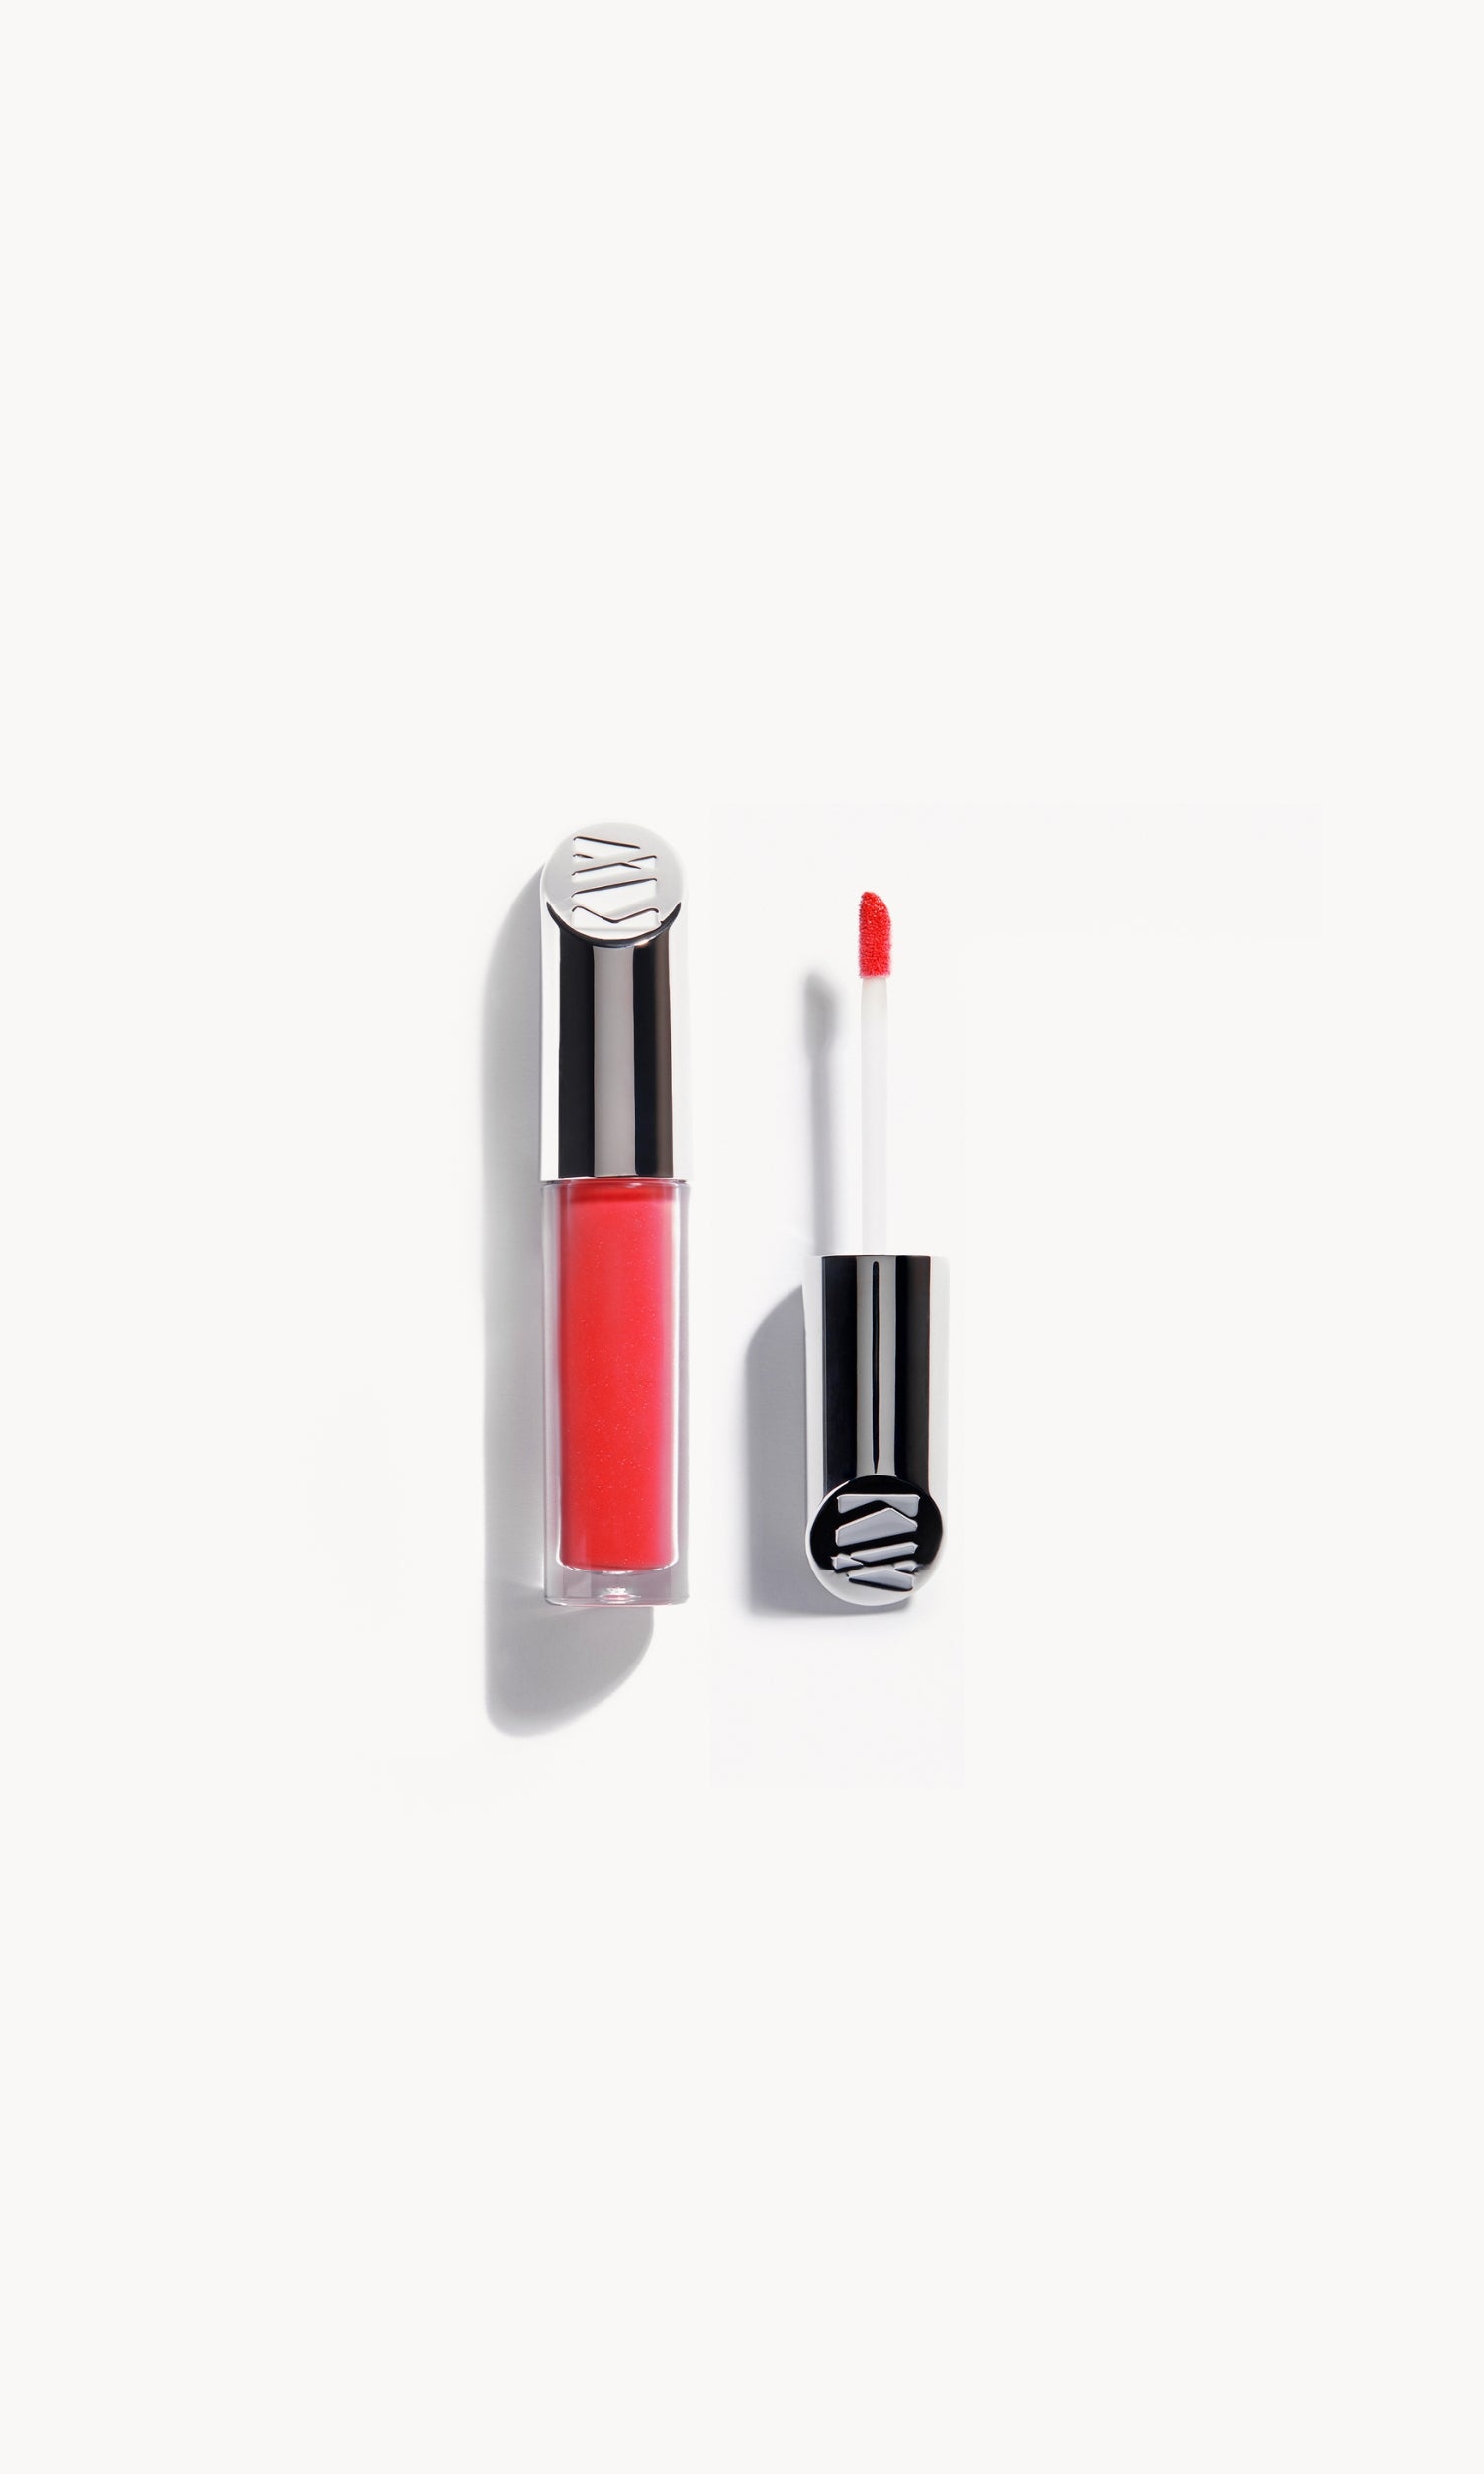 5 Bright Coral Lipsticks to Try This Summer